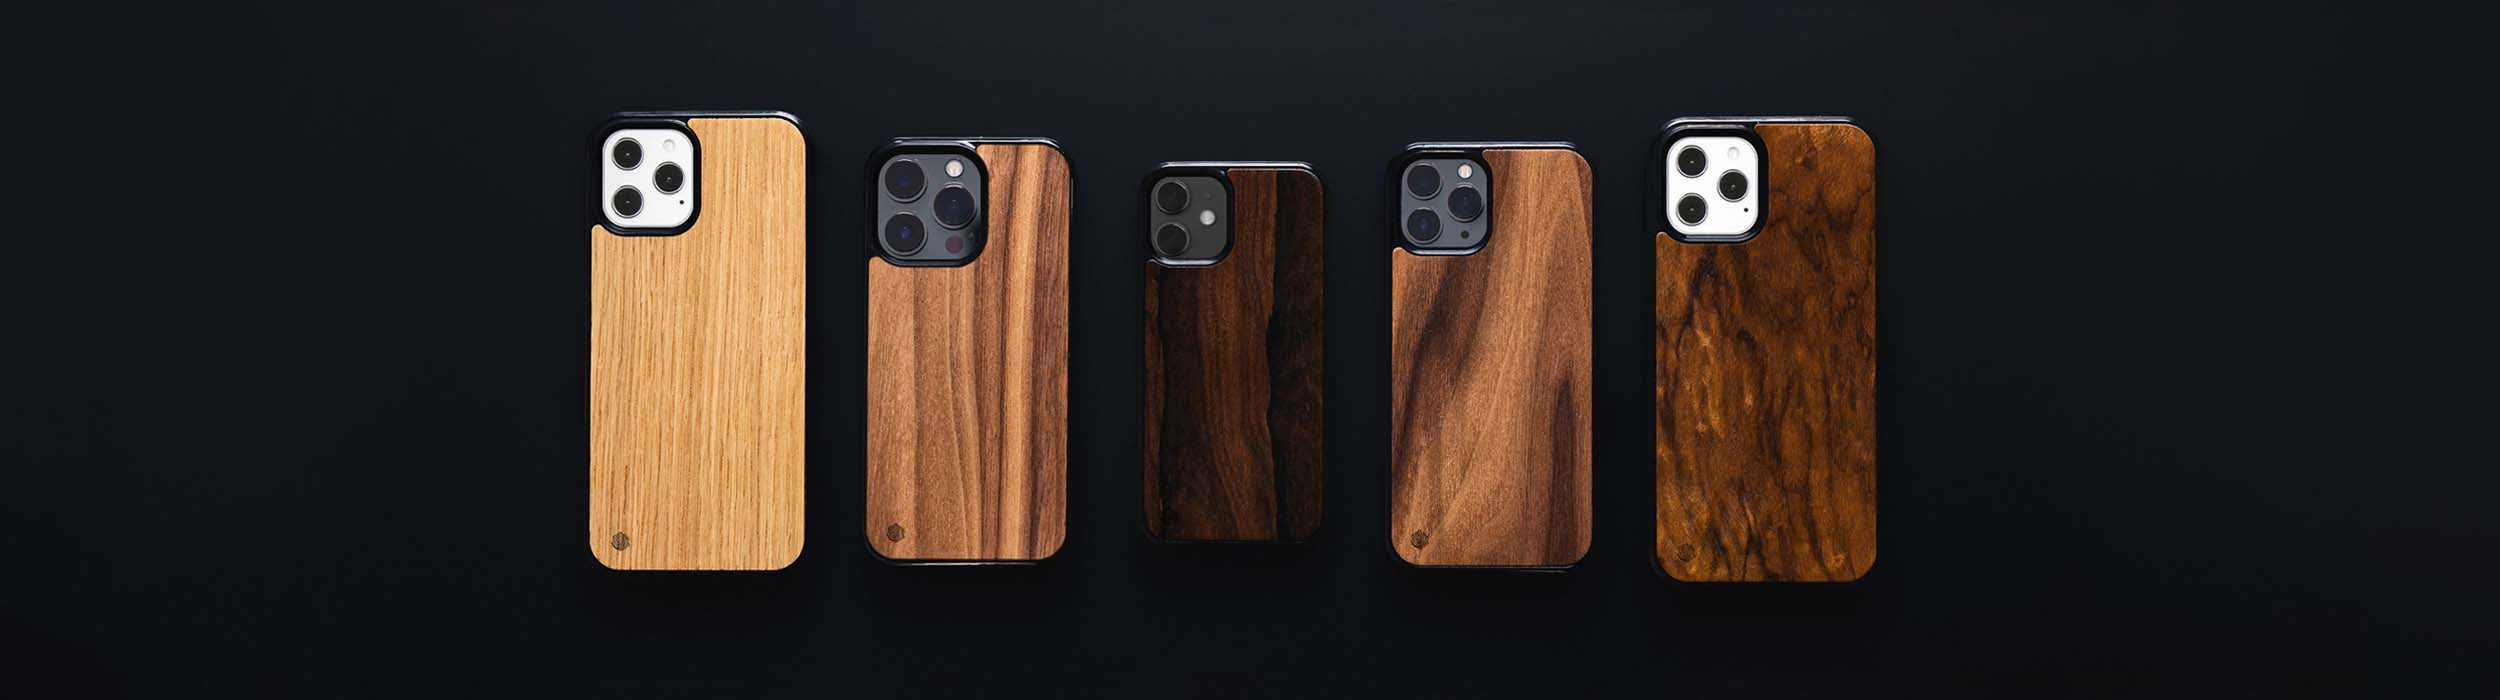 Apple iPhone 11 PRO Wooden Phone Cases